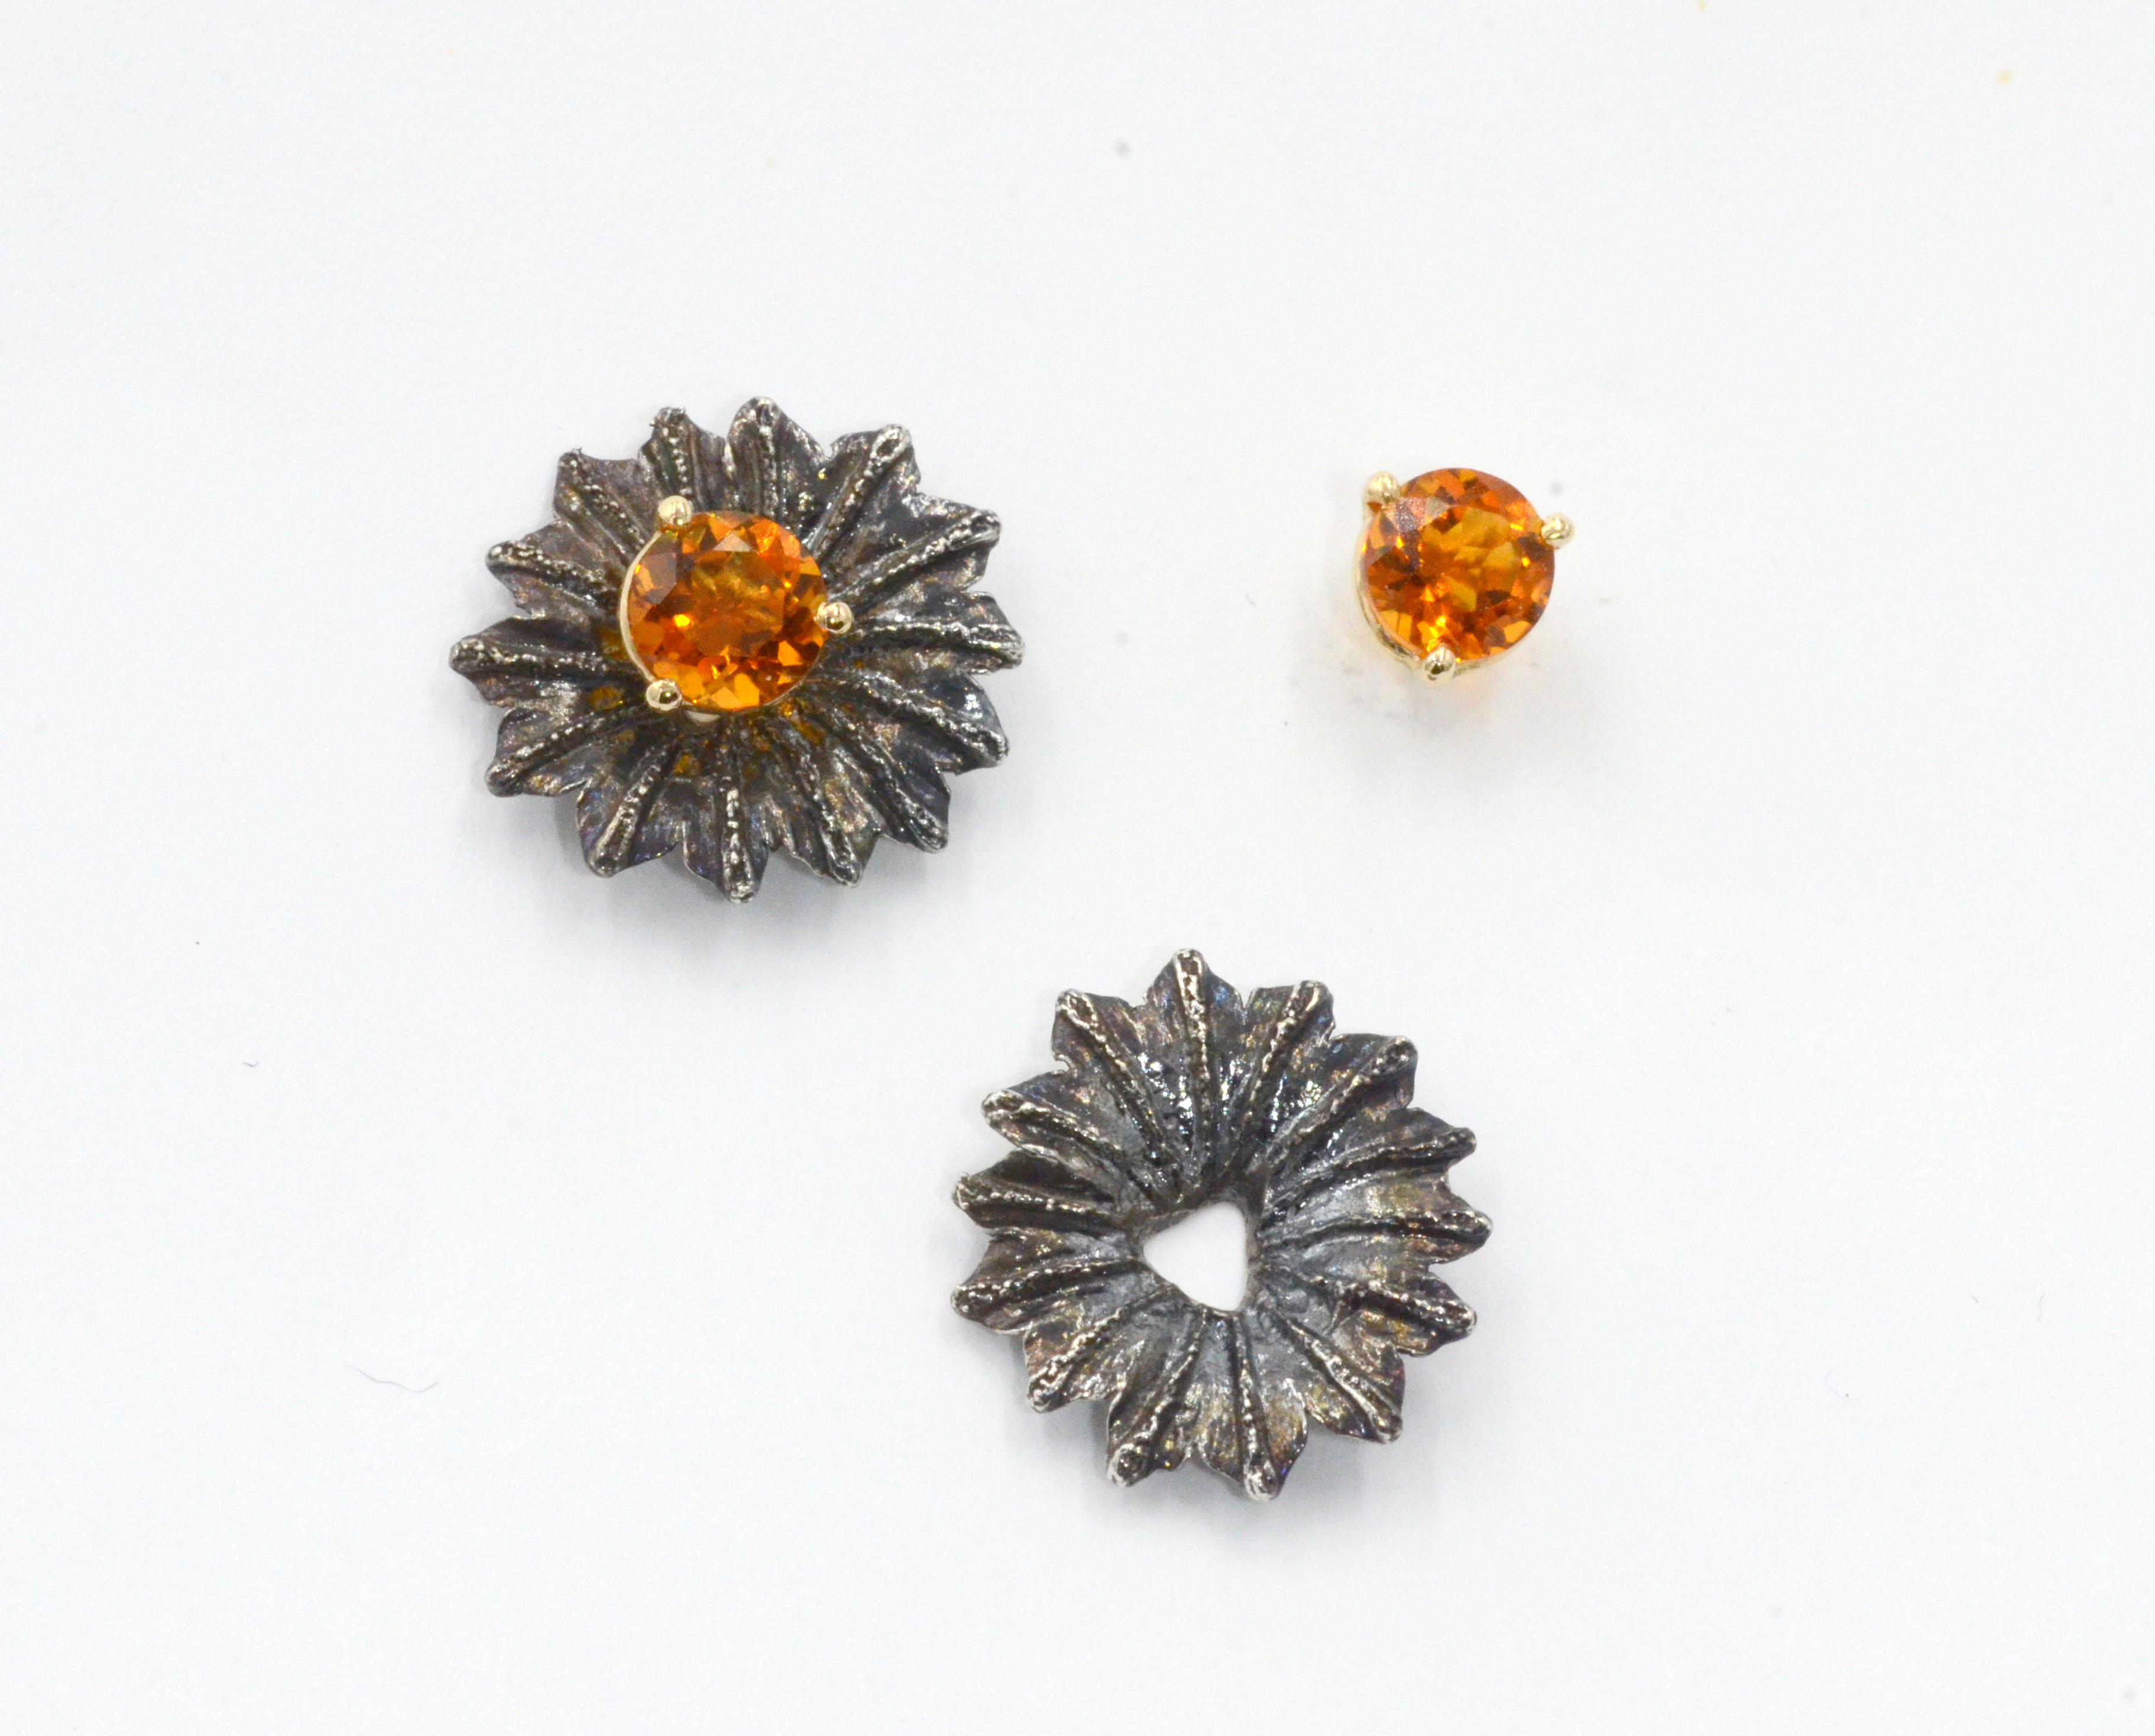 Hand made 3 prong Martini settings with 5 mm round Citrine Gemstone. Shown with our earring jackets. We were making these settings back in the 70's long before the industry added this design to standard inventory product line.